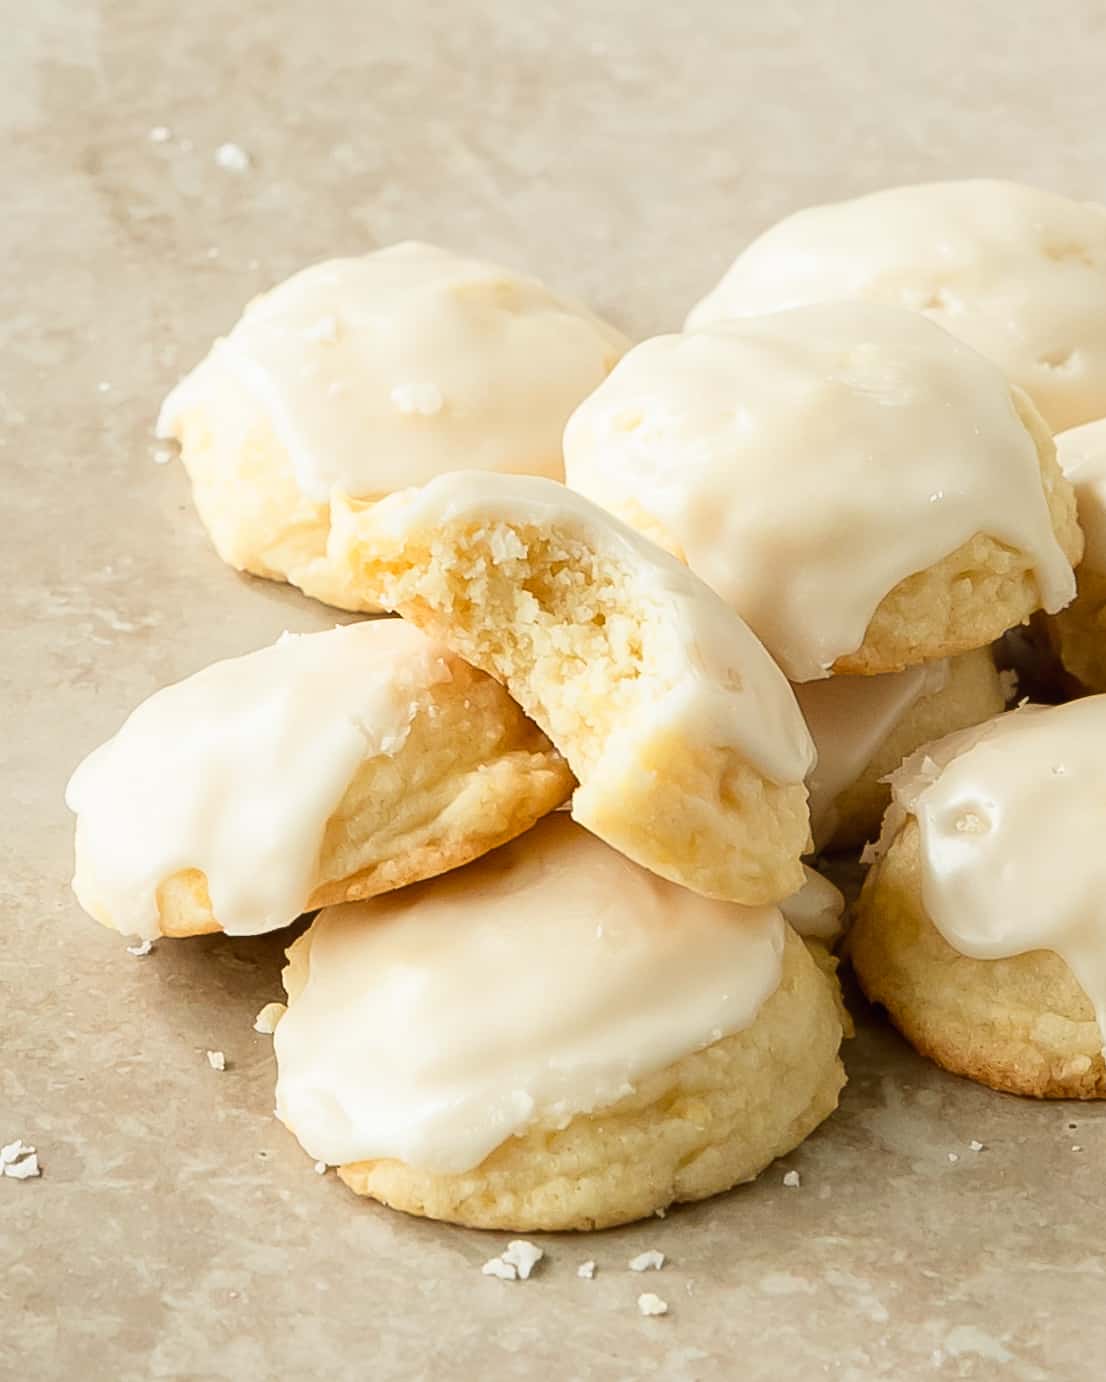 Lemon drop cookies are soft and buttery cookies filled with bright and fresh lemon flavor. Enjoy these bite sized Italian lemon cookies plain or with a sweet and tart lemon glaze. Make these wonderfully refreshing and beautifully fragrant glazed lemon cookies for a taste of spring and summer all year long.